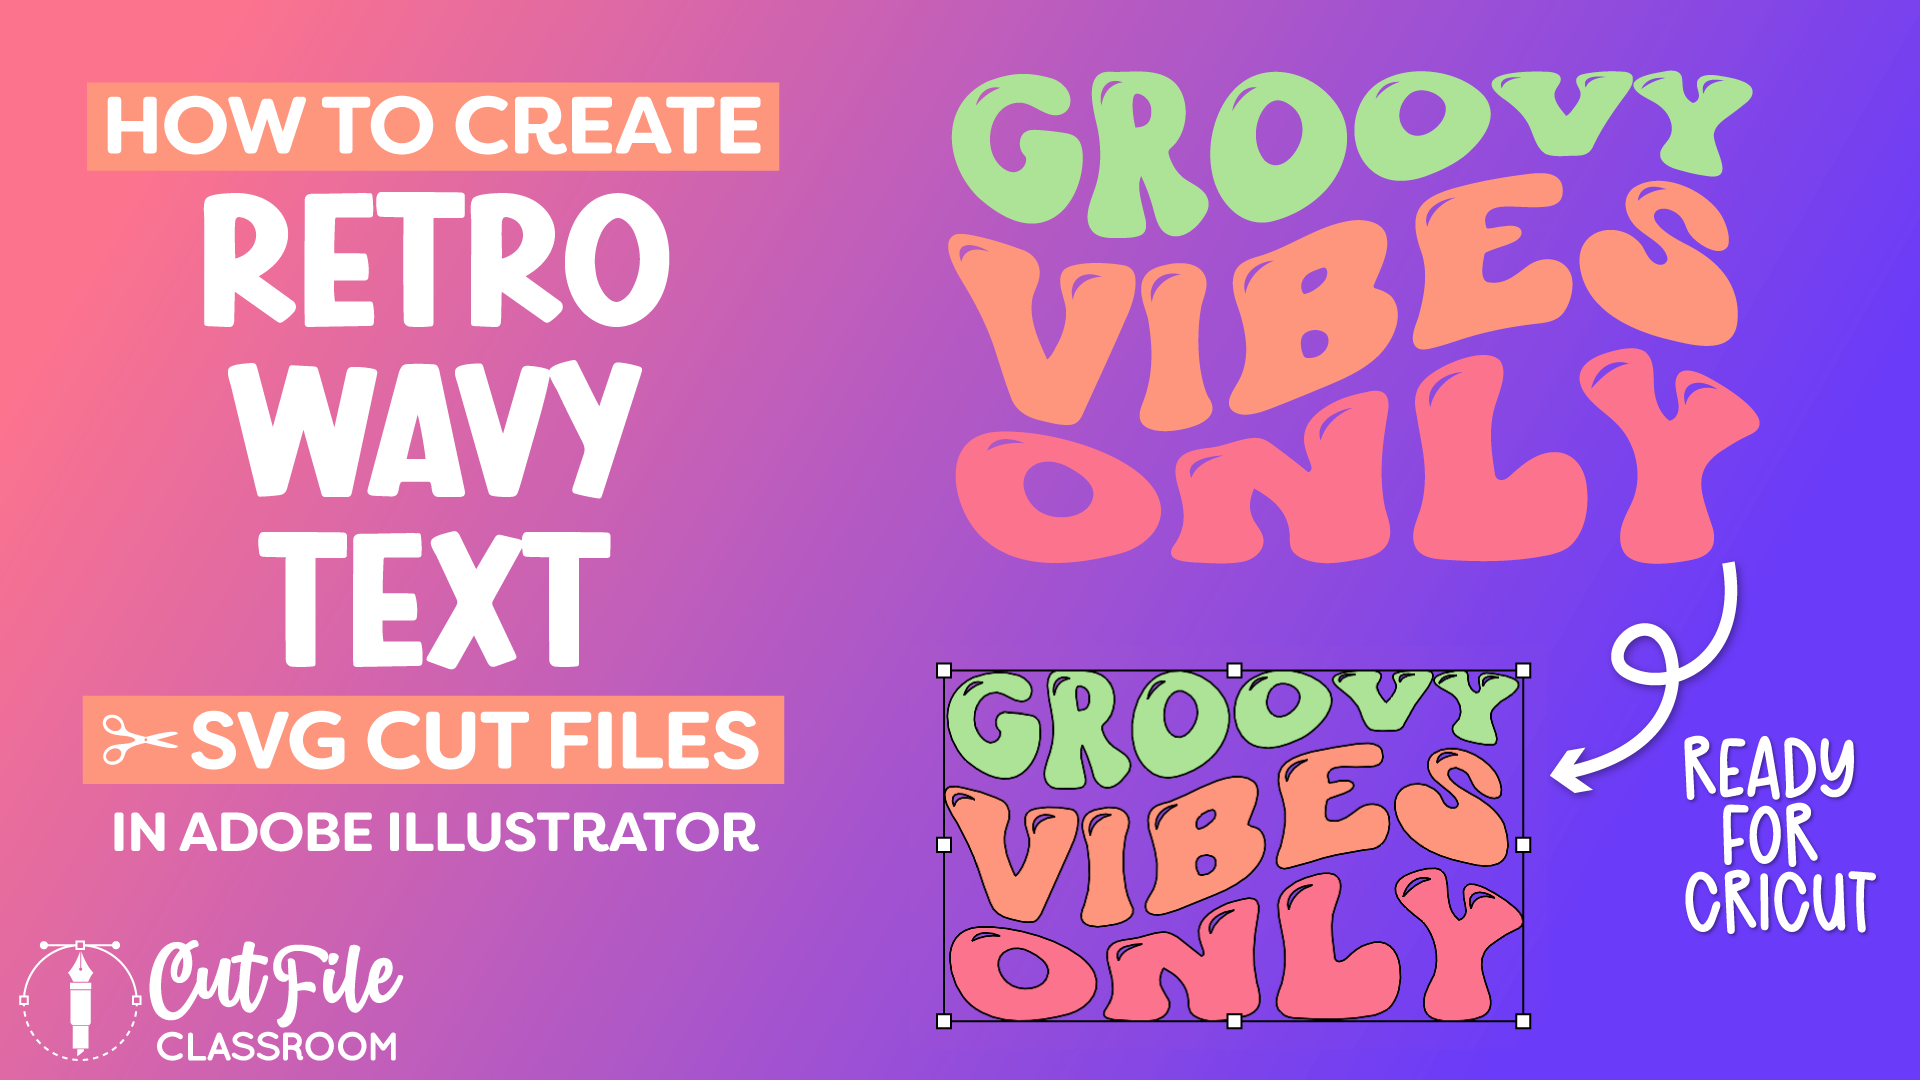 How to Create Retro Wavy Text SVG Cut Files in Adobe Illustrator